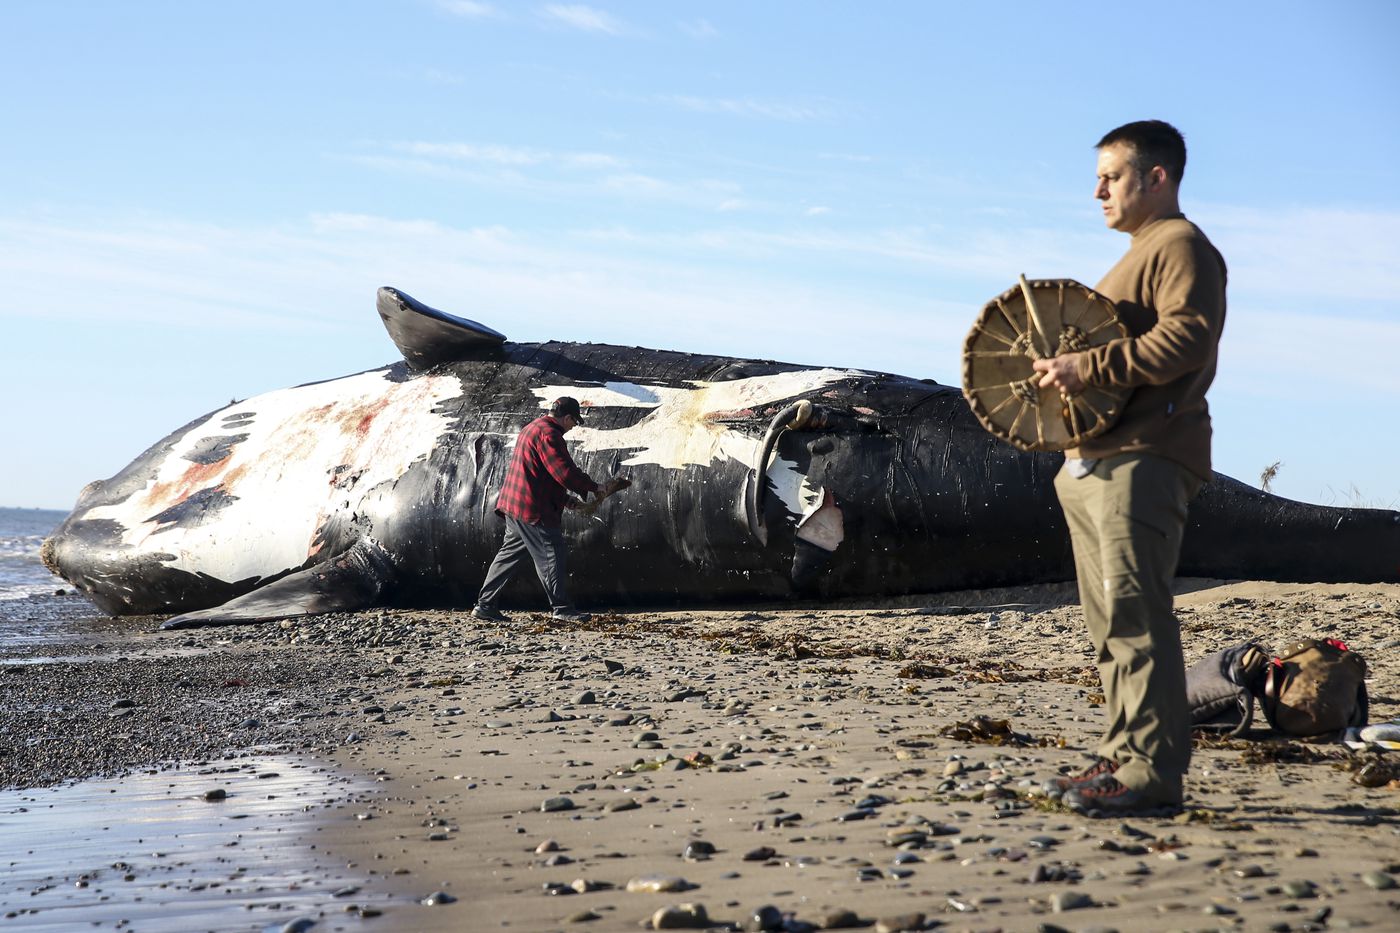 how to, we know how to save these beloved endangered whales. yet we’re mindlessly killing them.